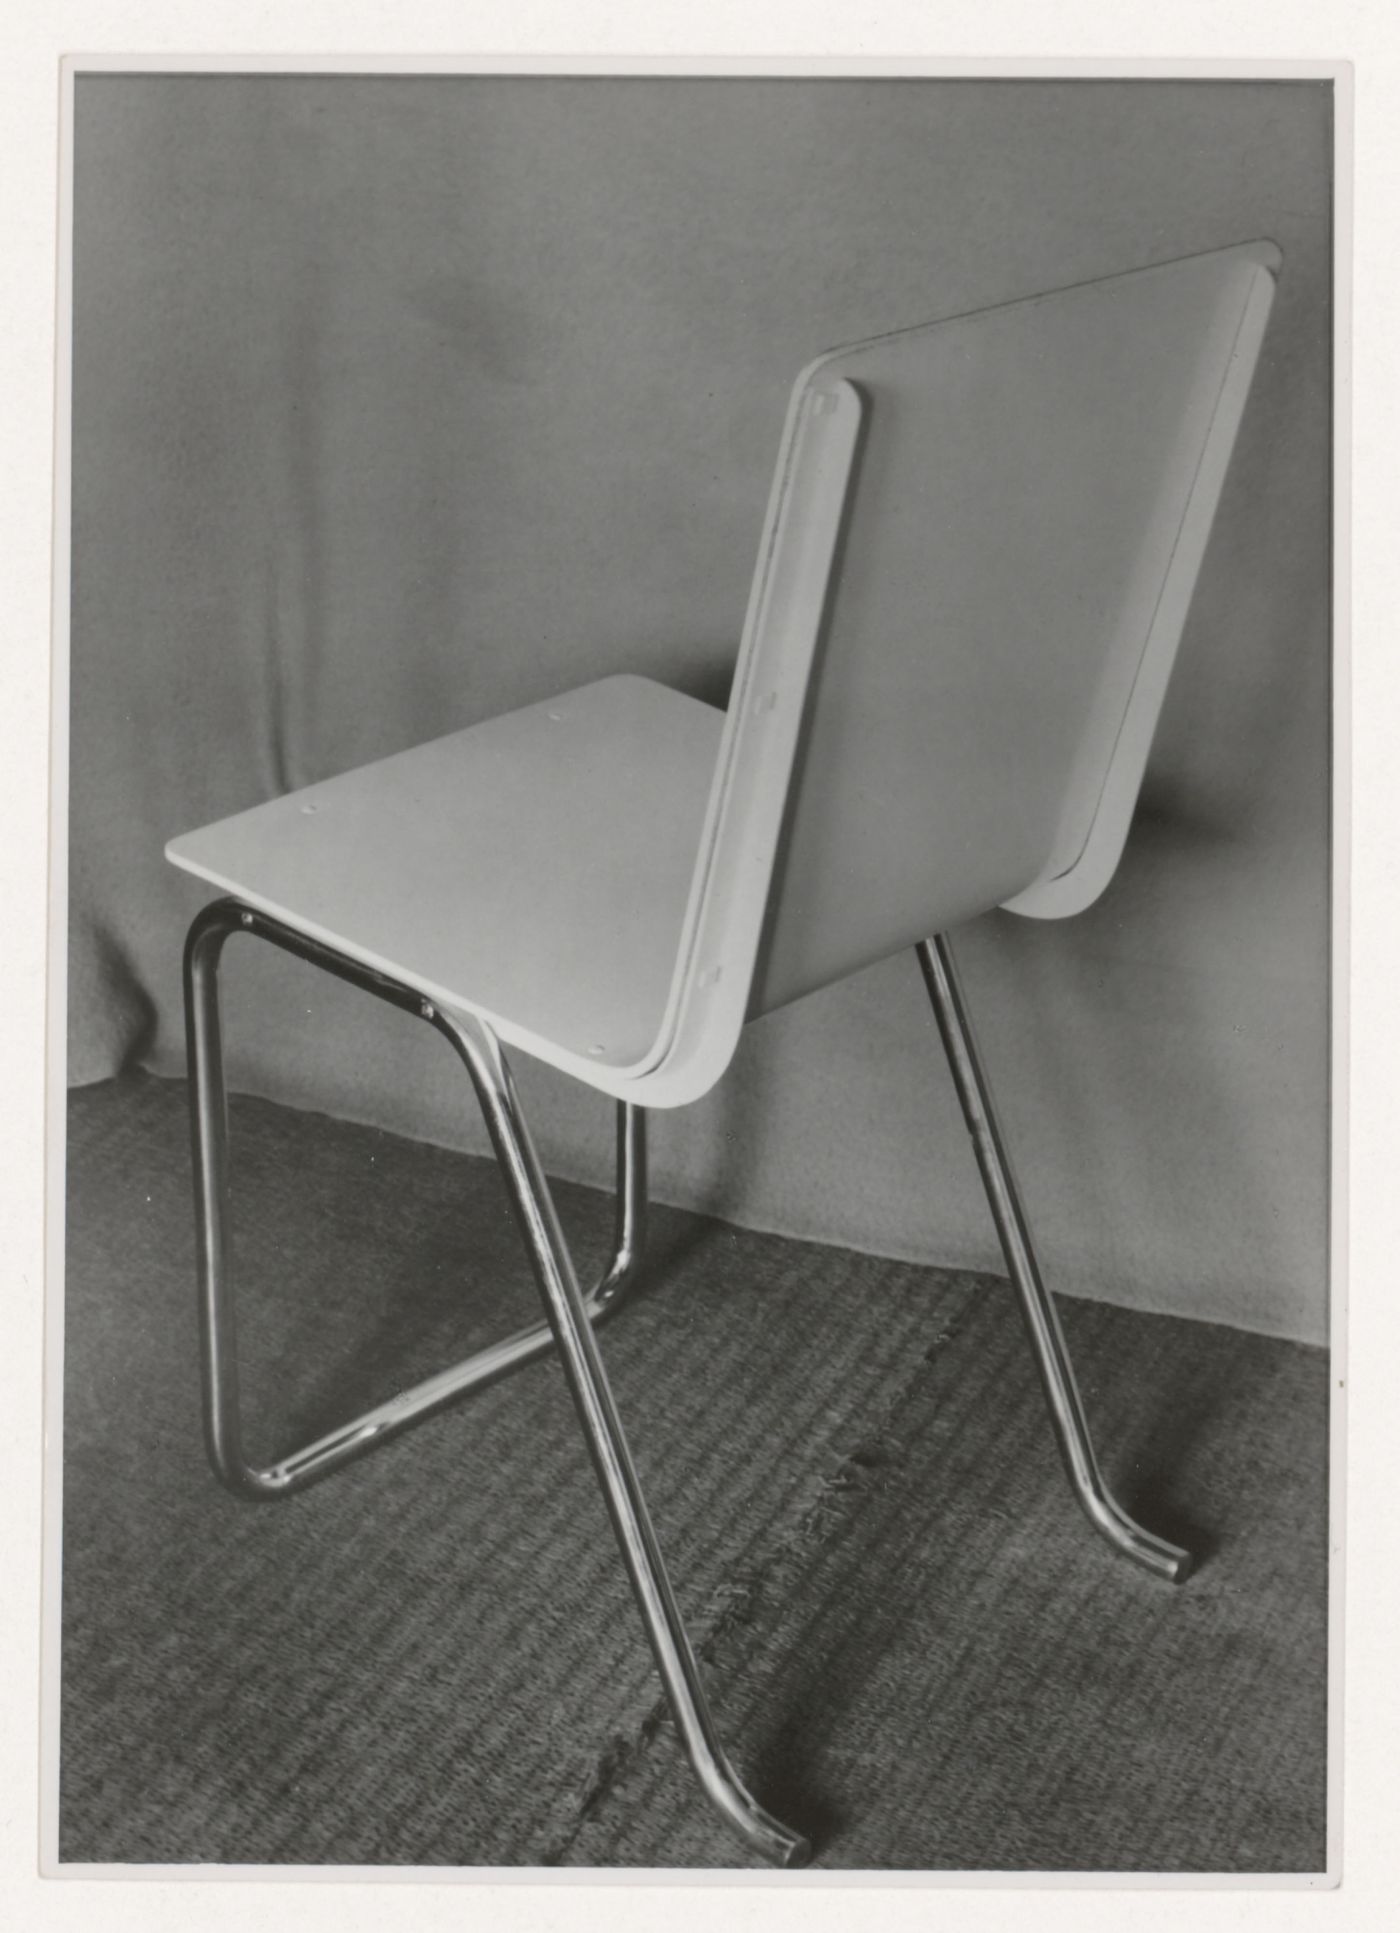 View of an office chair designed by J.J.P. Oud for Metz & Co., Amsterdam, Netherlands